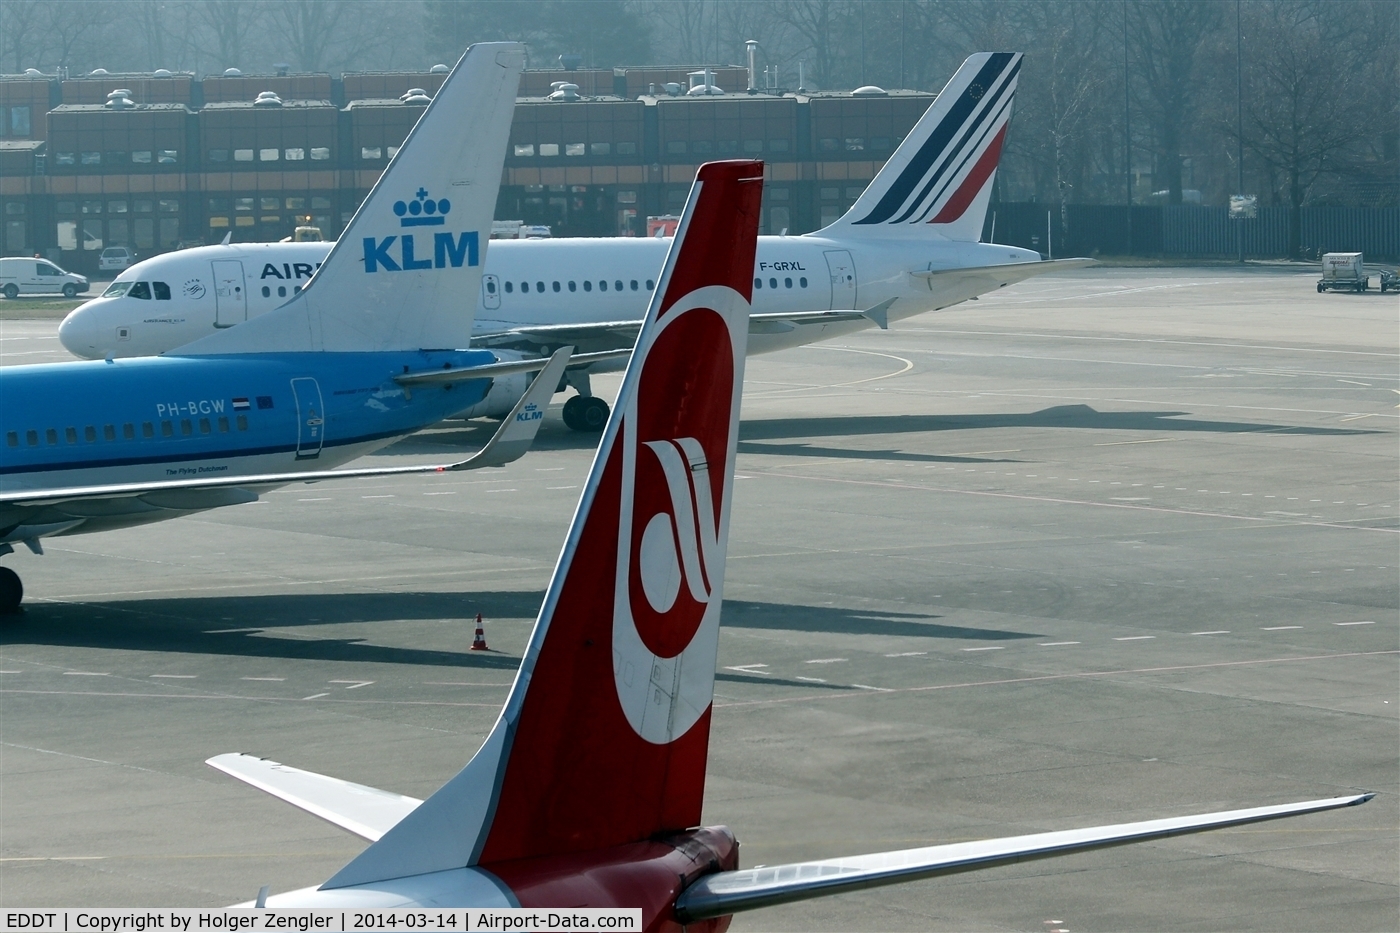 Tegel International Airport (closing in 2011), Berlin Germany (EDDT) - Famous european empennages.....